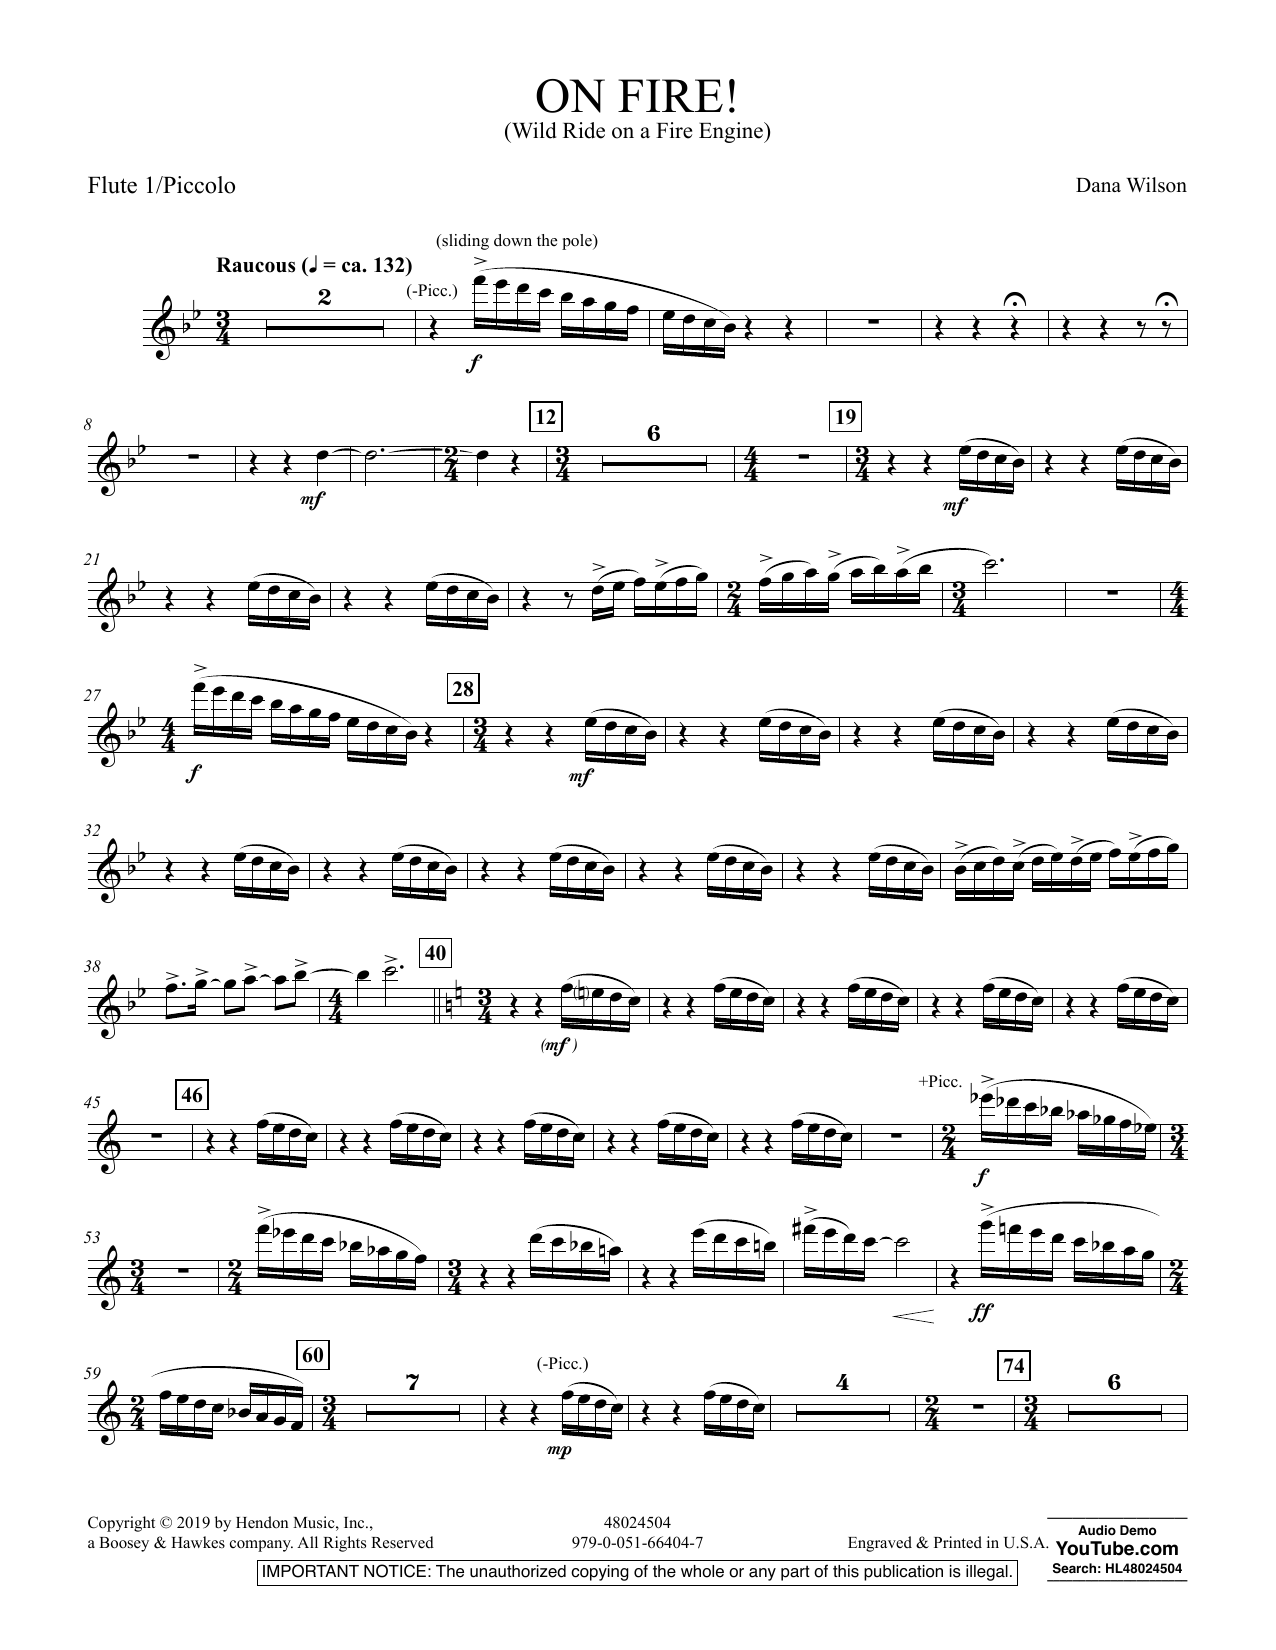 Dana Wilson On Fire! (Wild Ride on a Fire Engine) - Flute 1 (Piccolo) sheet music preview music notes and score for Concert Band including 2 page(s)